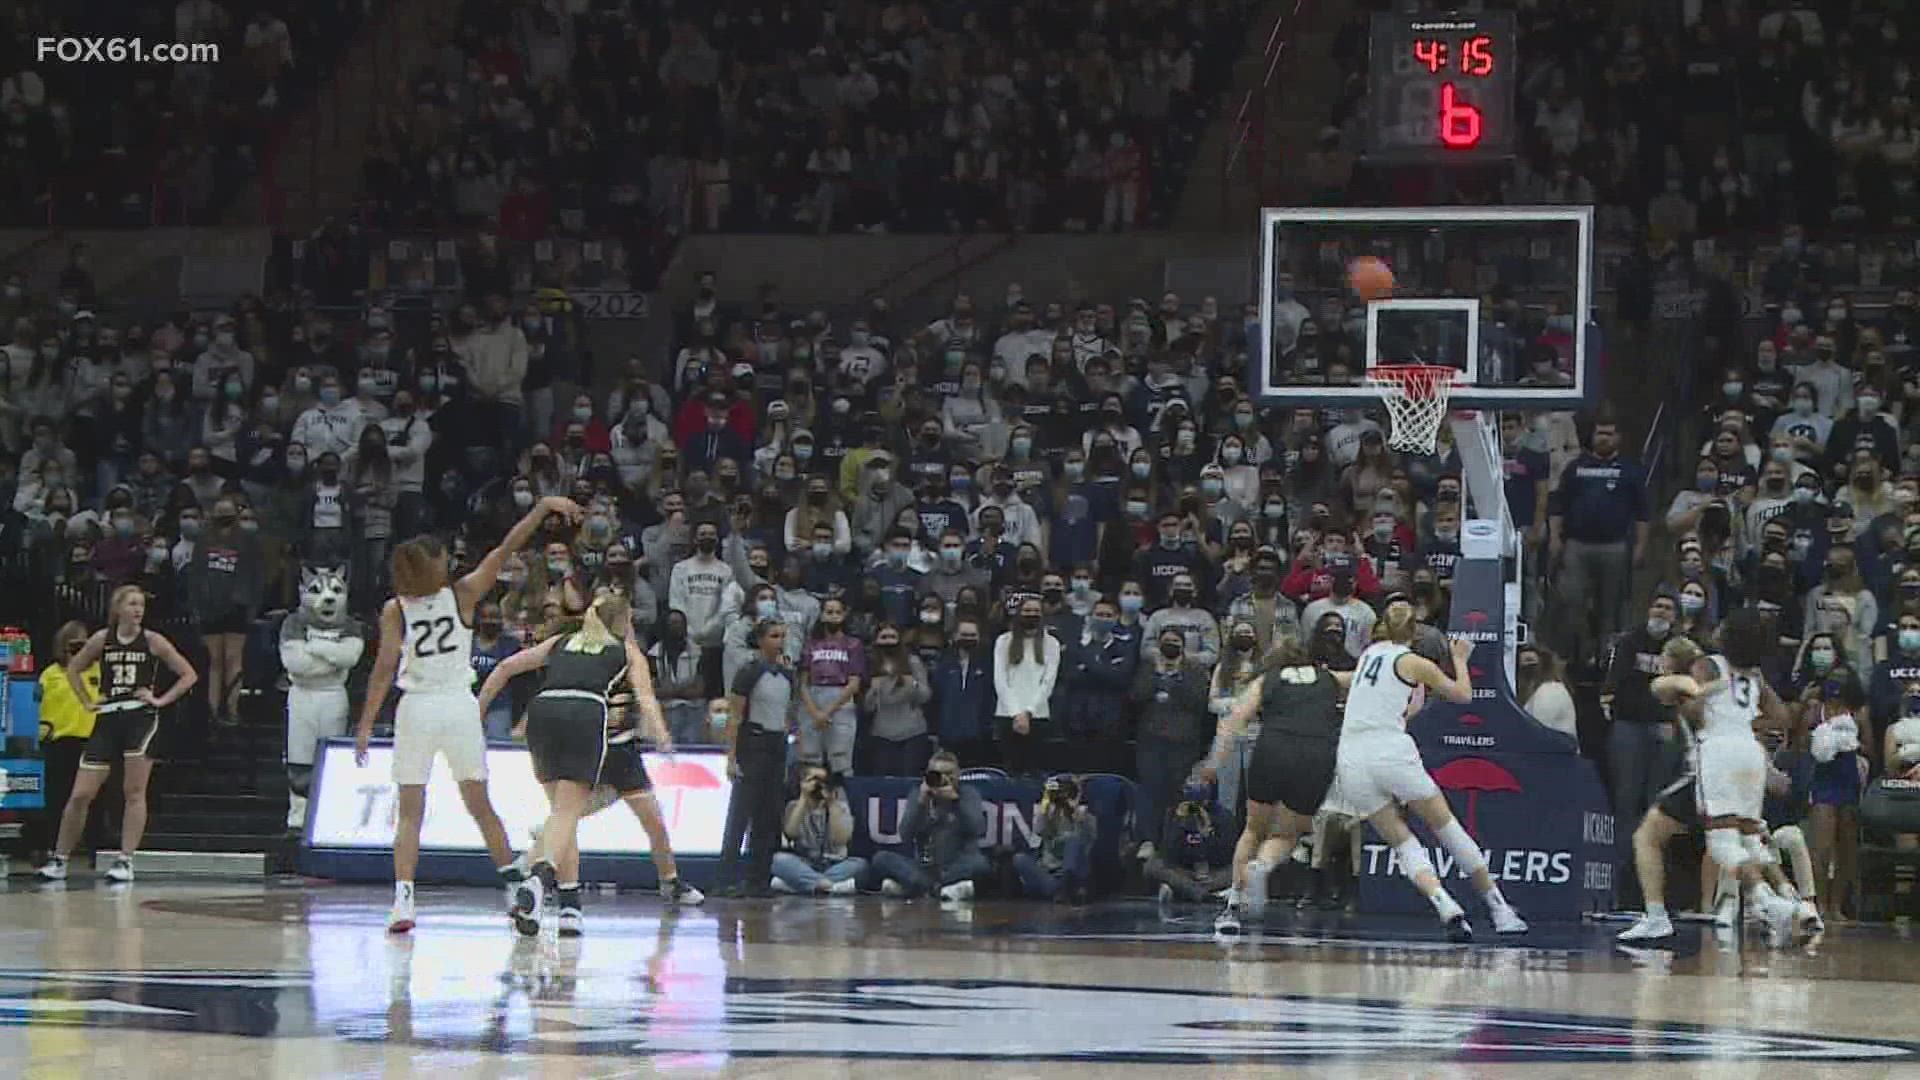 UConn women's basketball back in action after COVID hiatus.